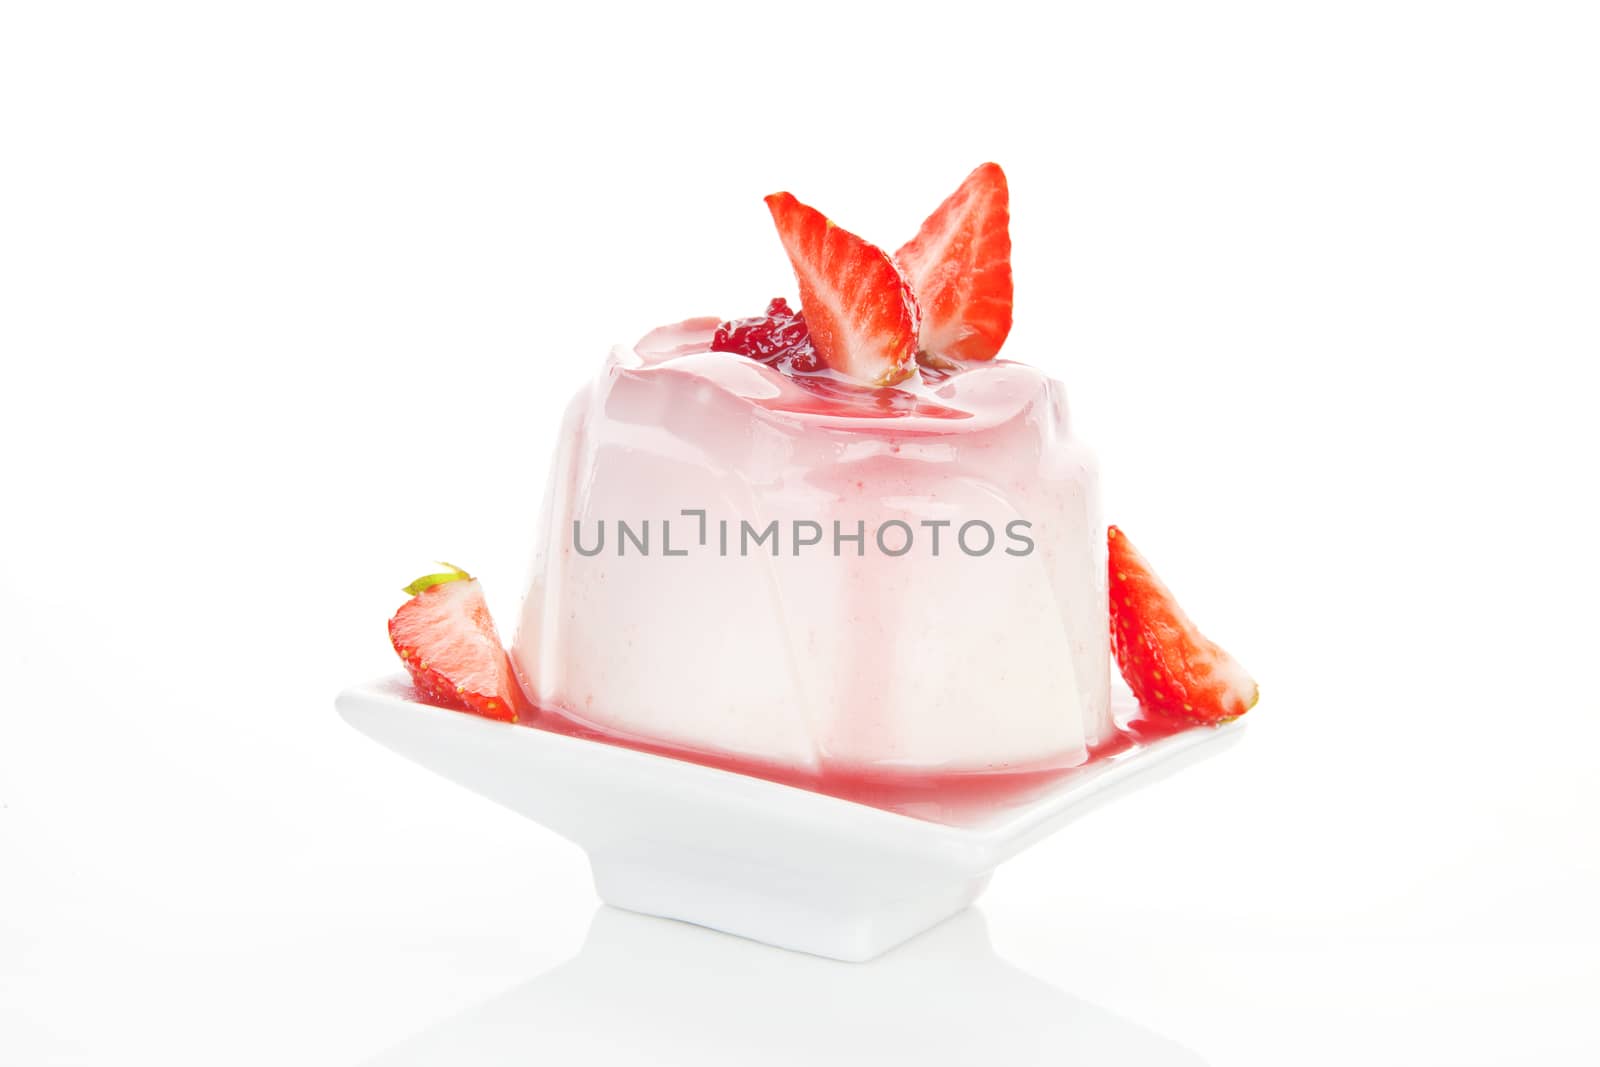 Delicious pudding dessert with fresh strawberries and cream isolated on white background. Culinary sweets concept.